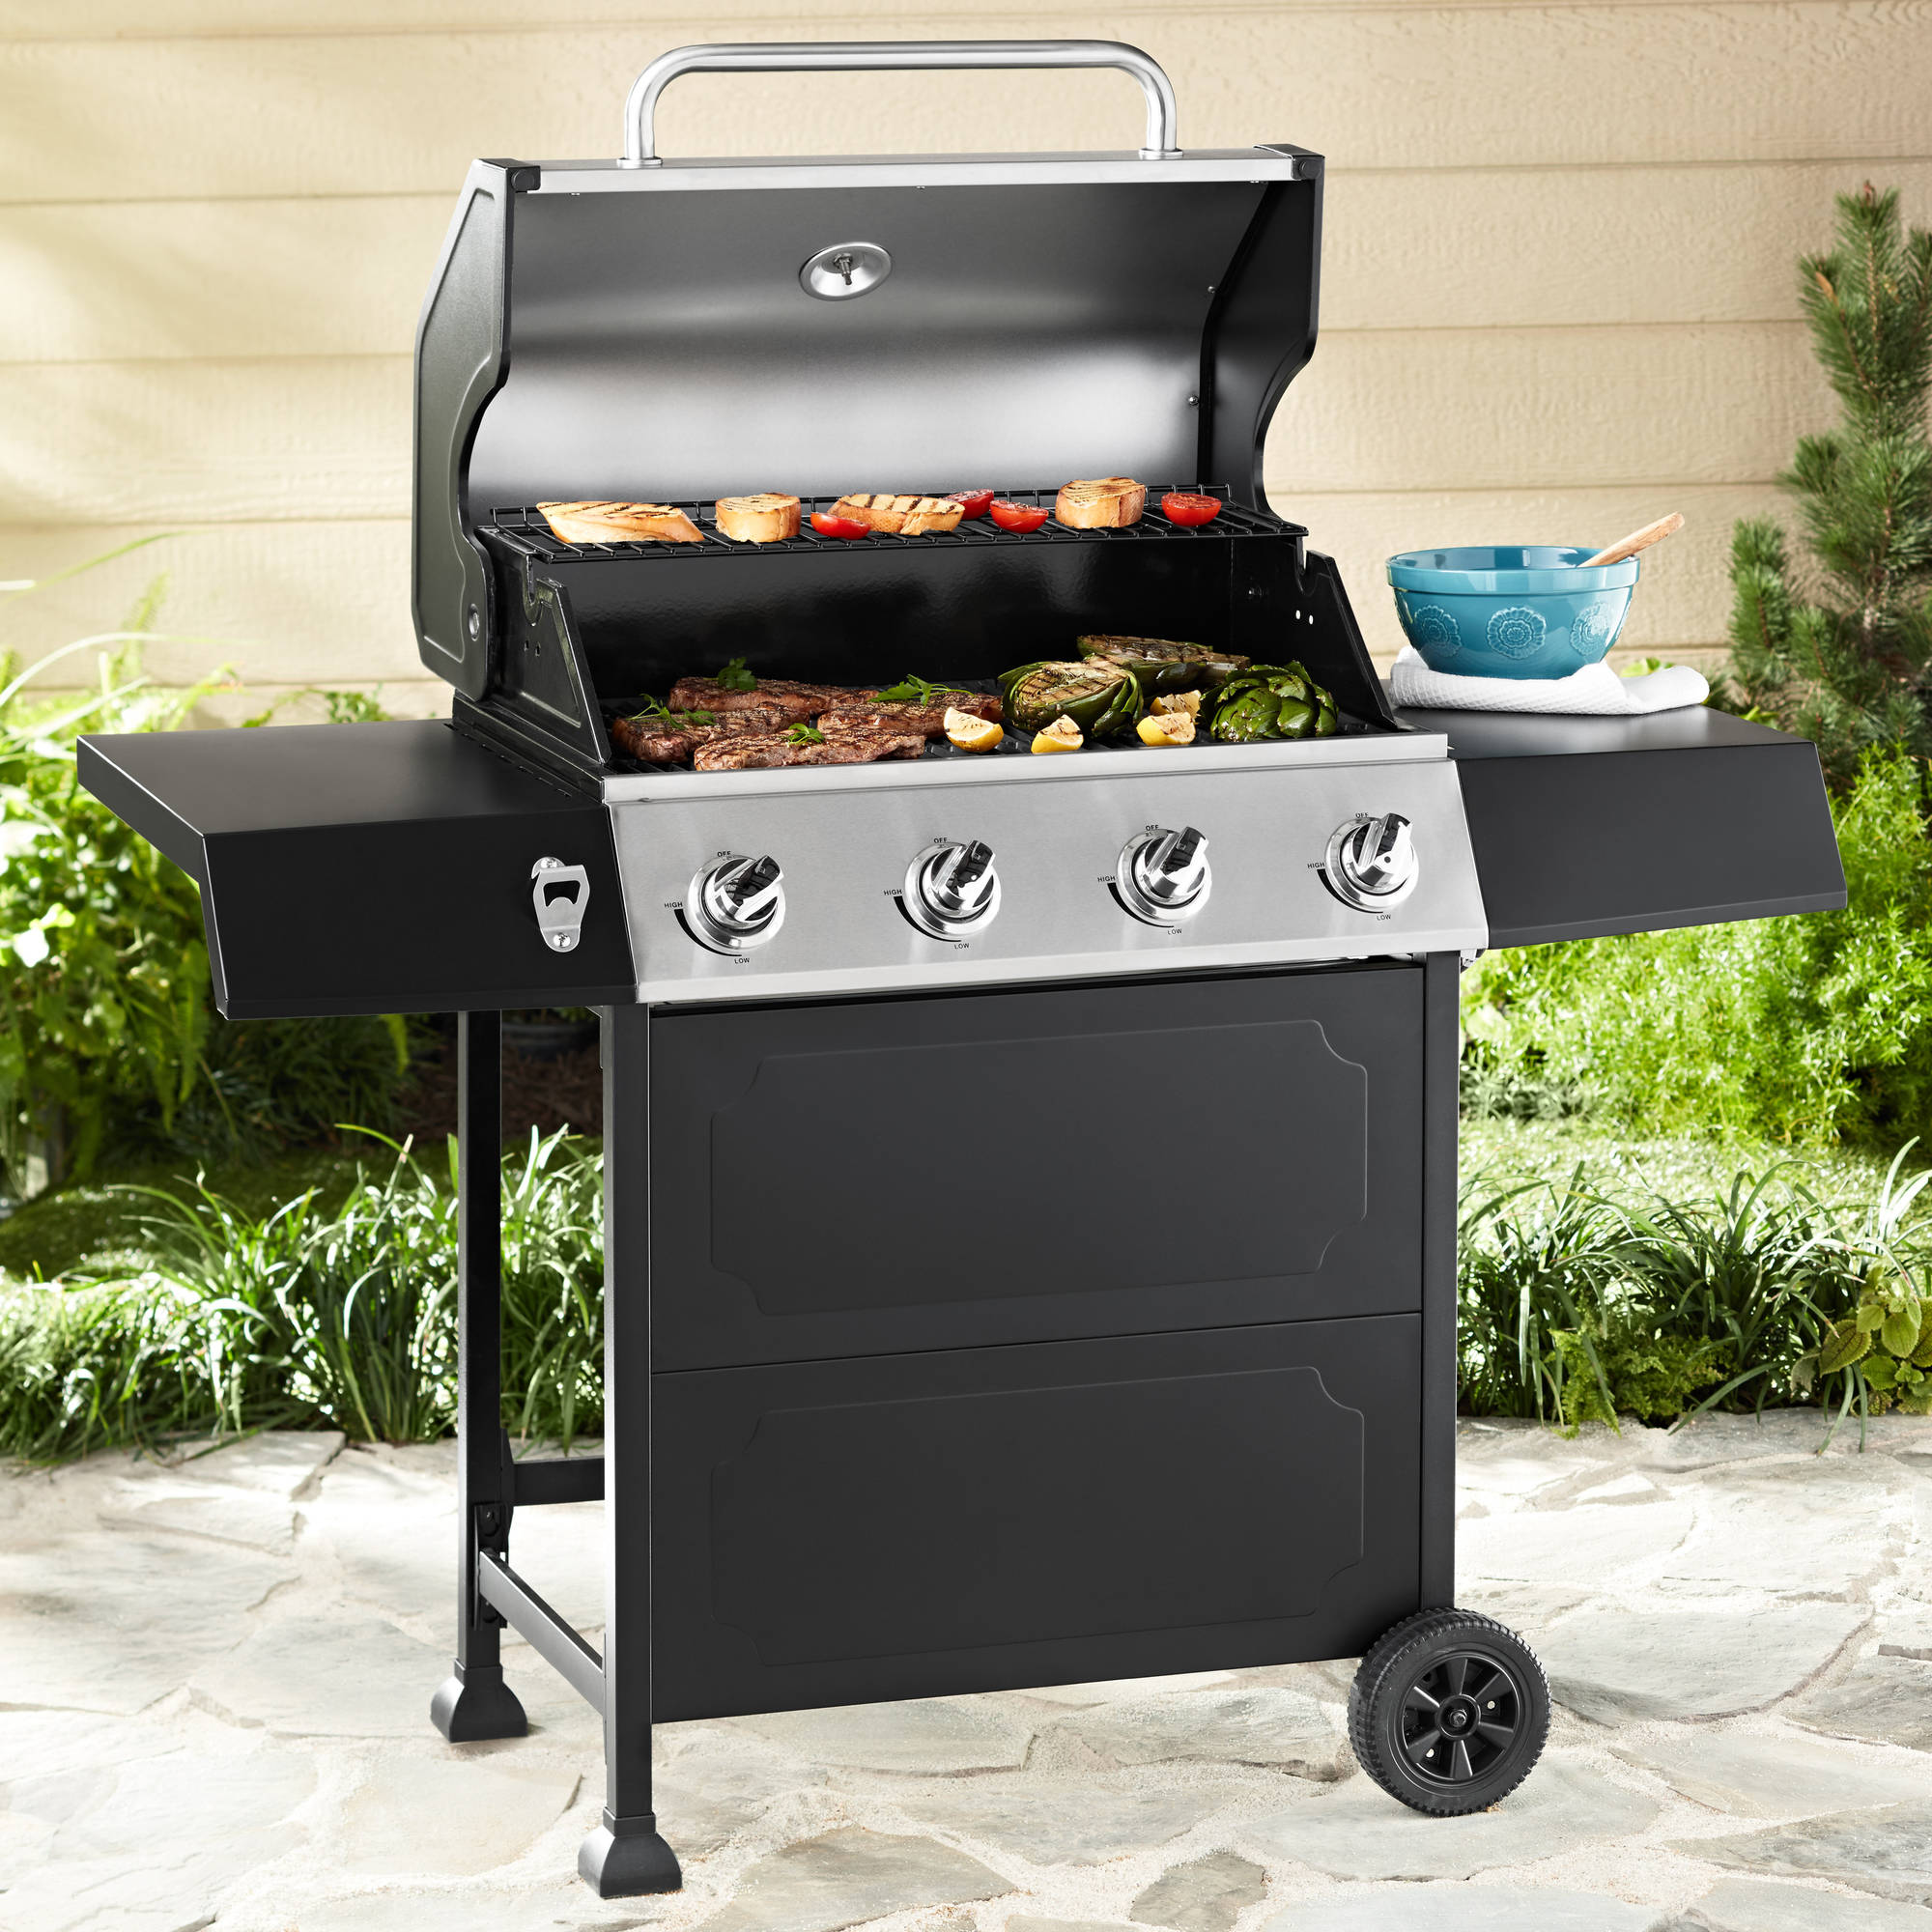 Price drop! Expert Grill 4-burner gas grill for $99, free shipping